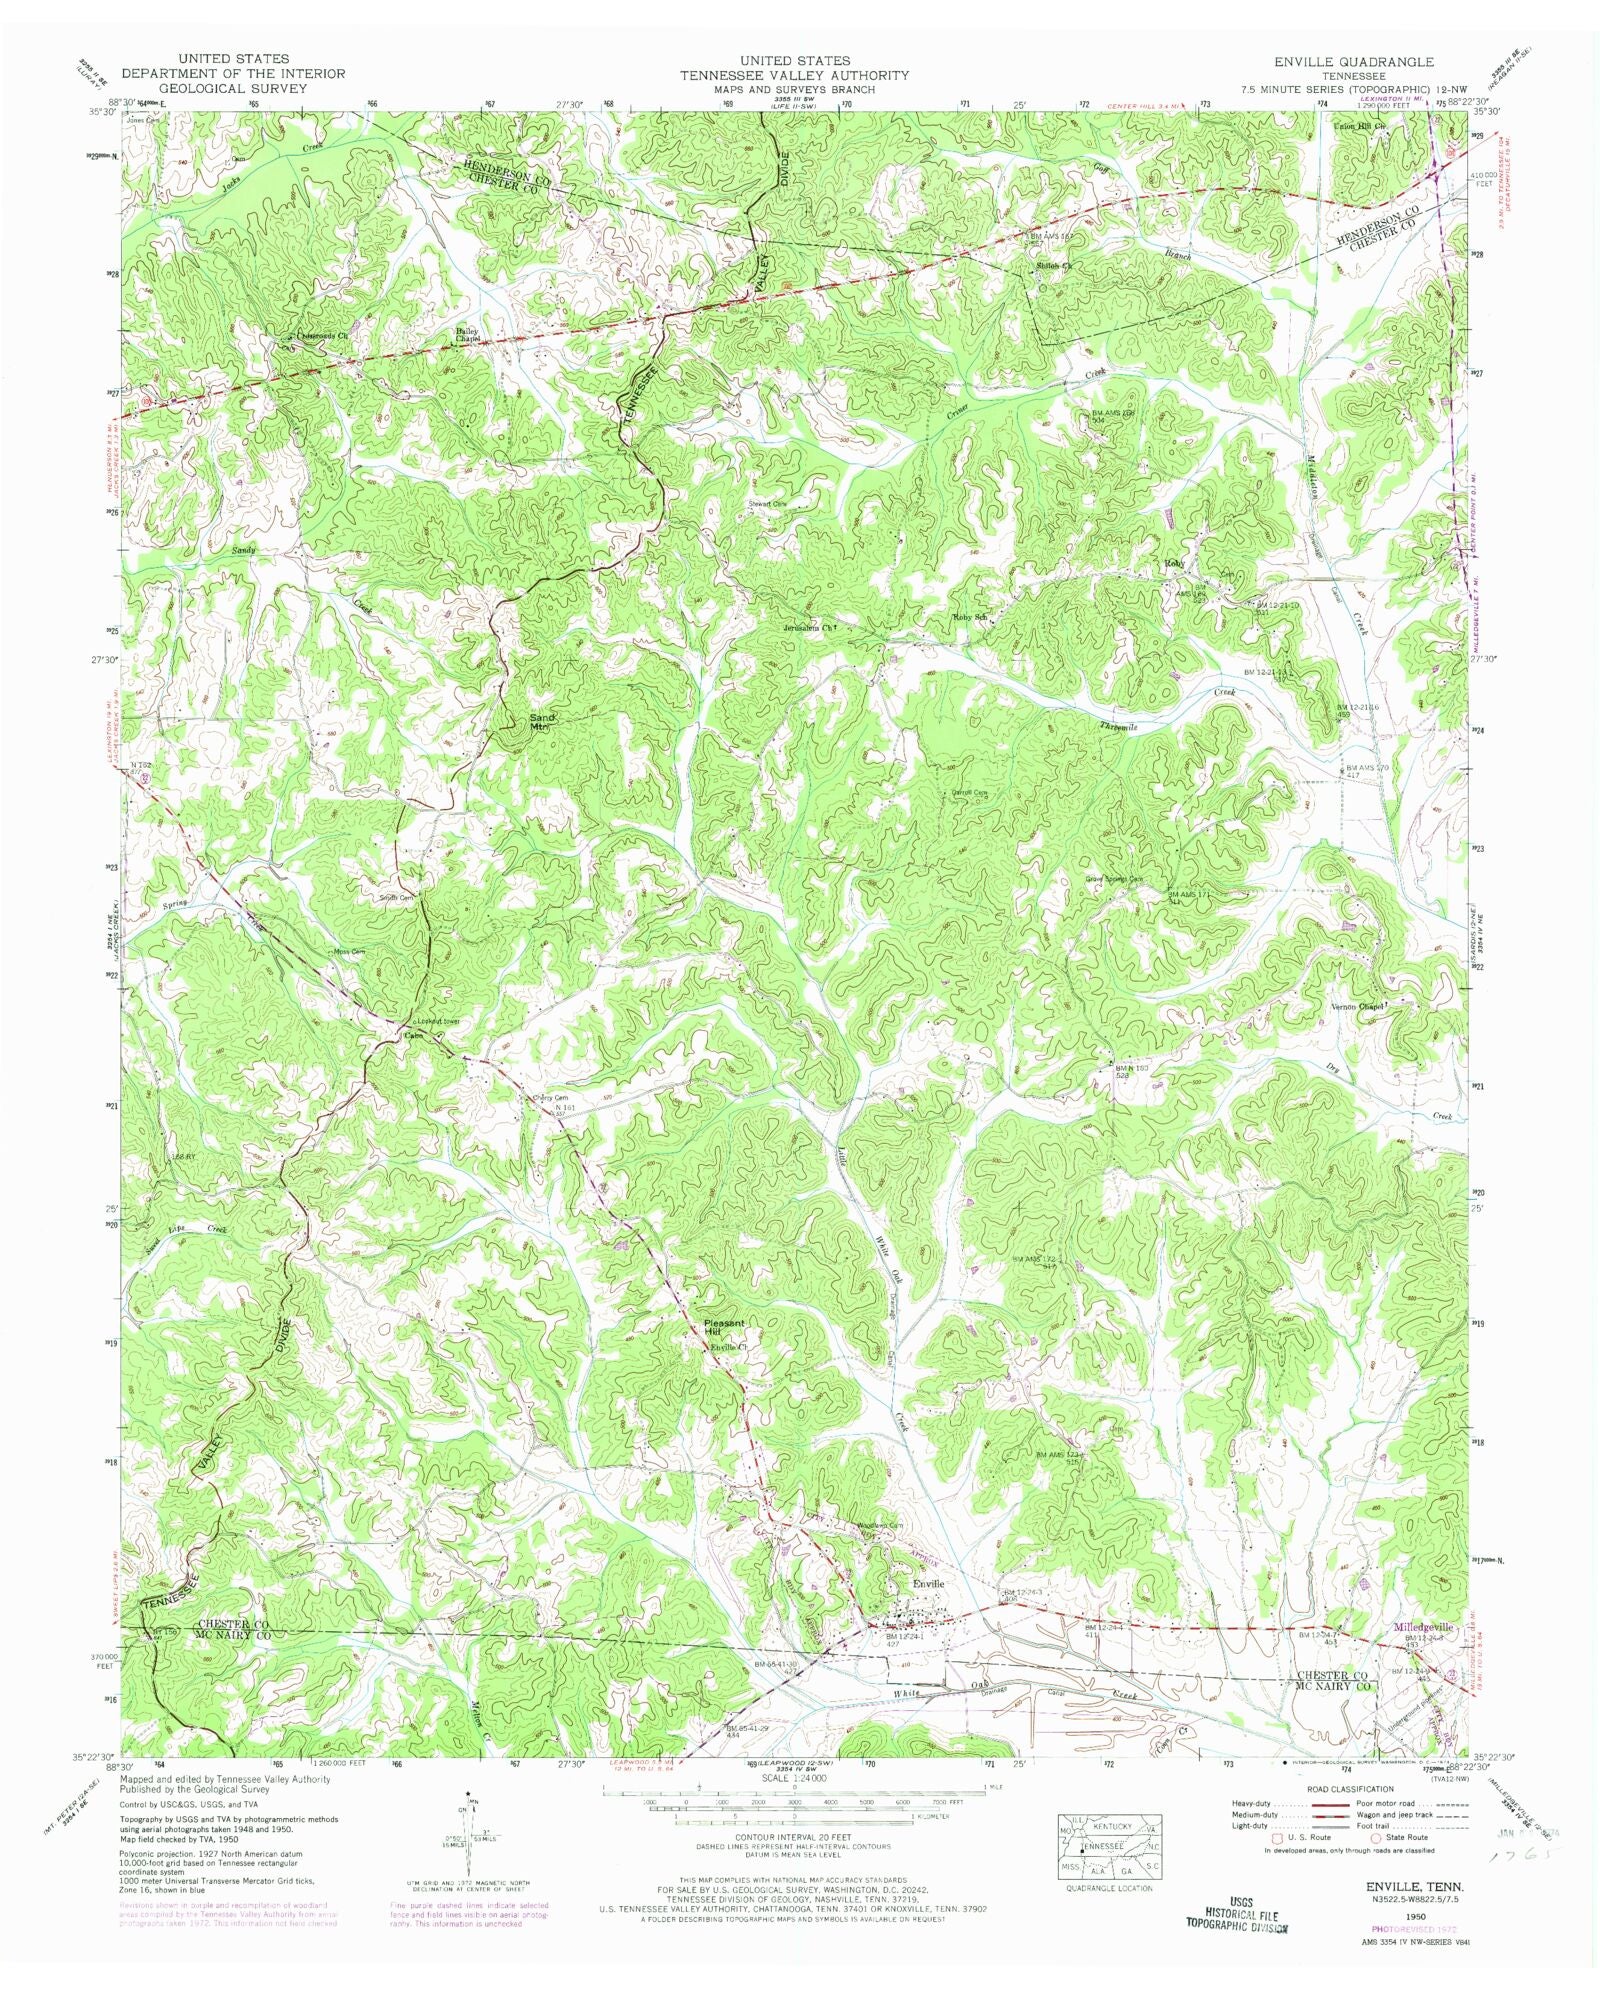 Classic　Tennessee　–　USGS　7.5'x7.5'　Map　MyTopo　Enville　Store　Topo　Map